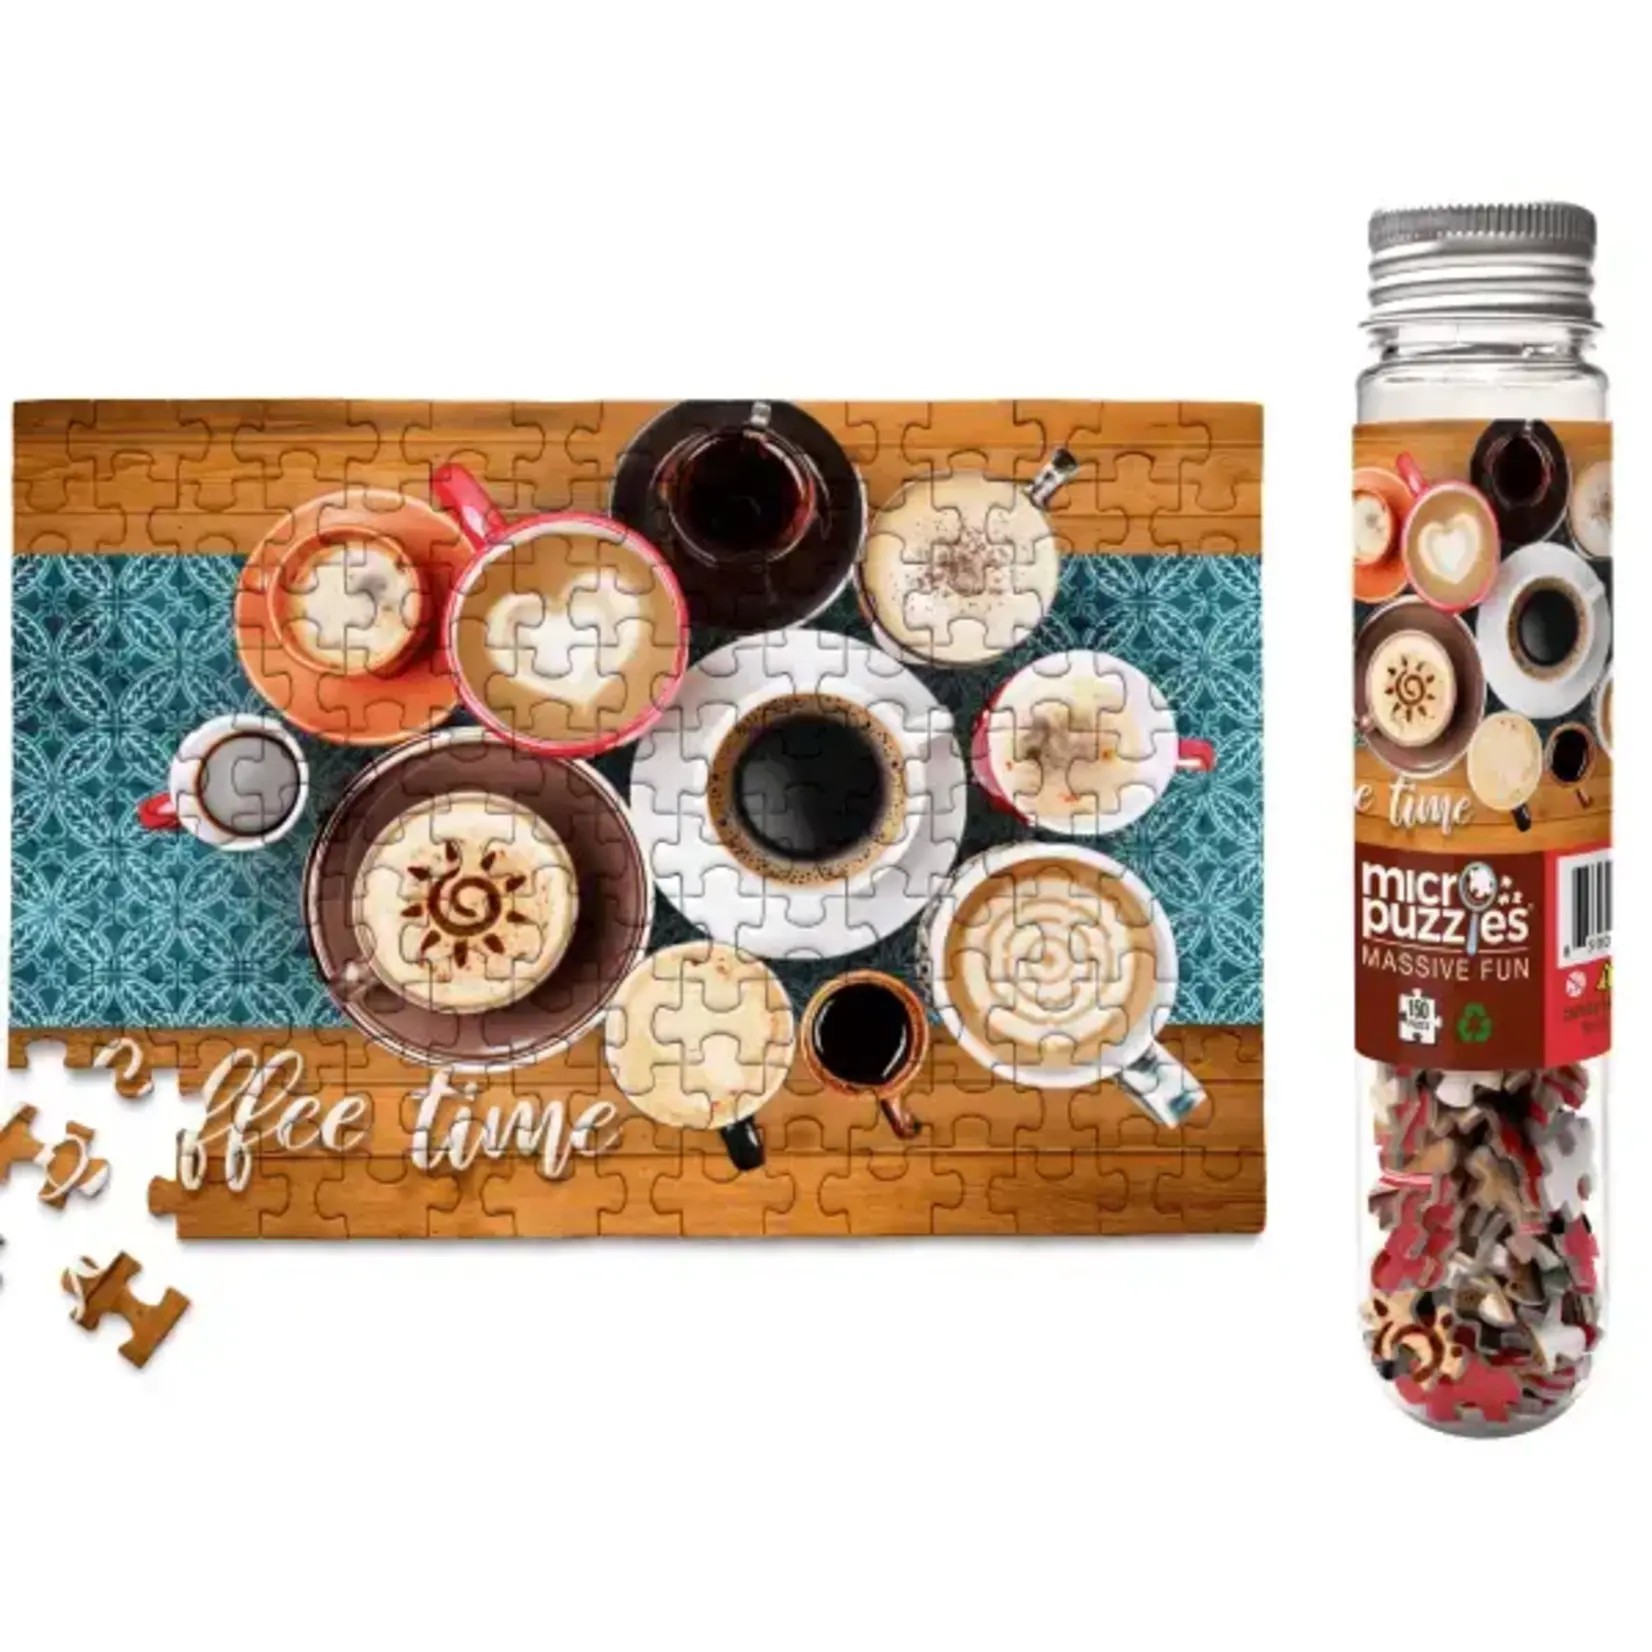 Micro Puzzles Puzzle Kaffee